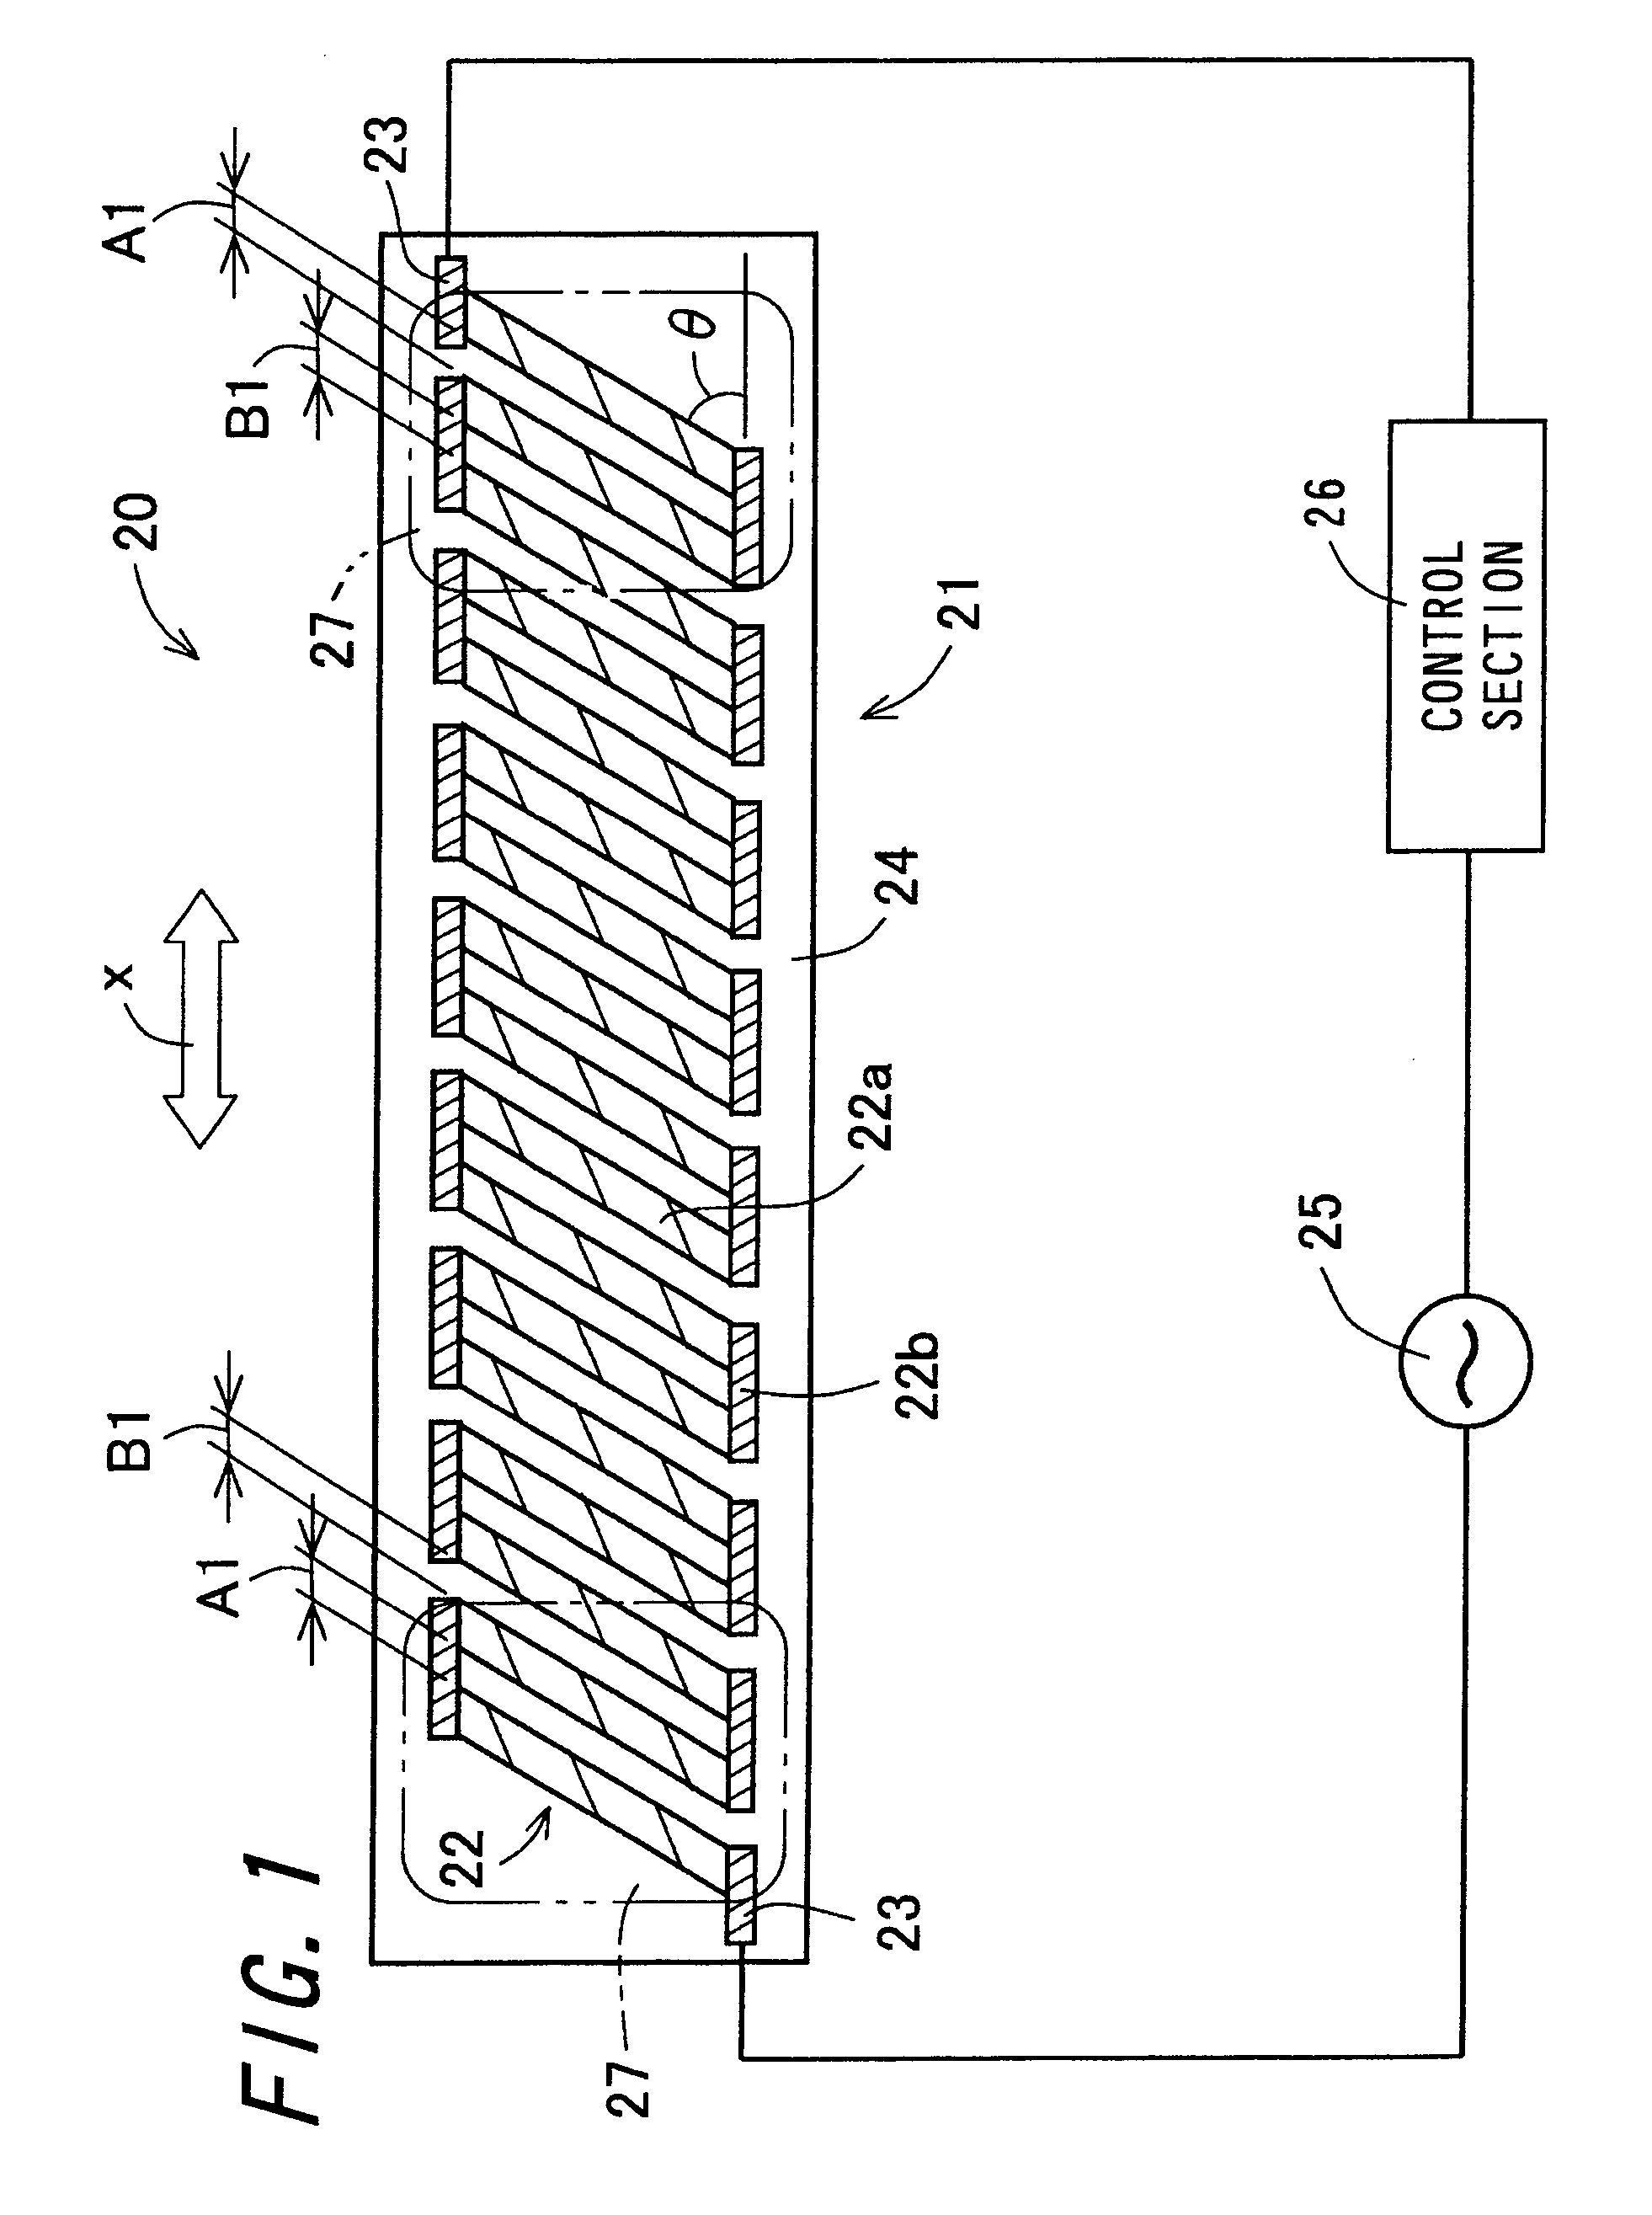 Planar heat generating element, fixing device including the same, and image forming apparatus including the same